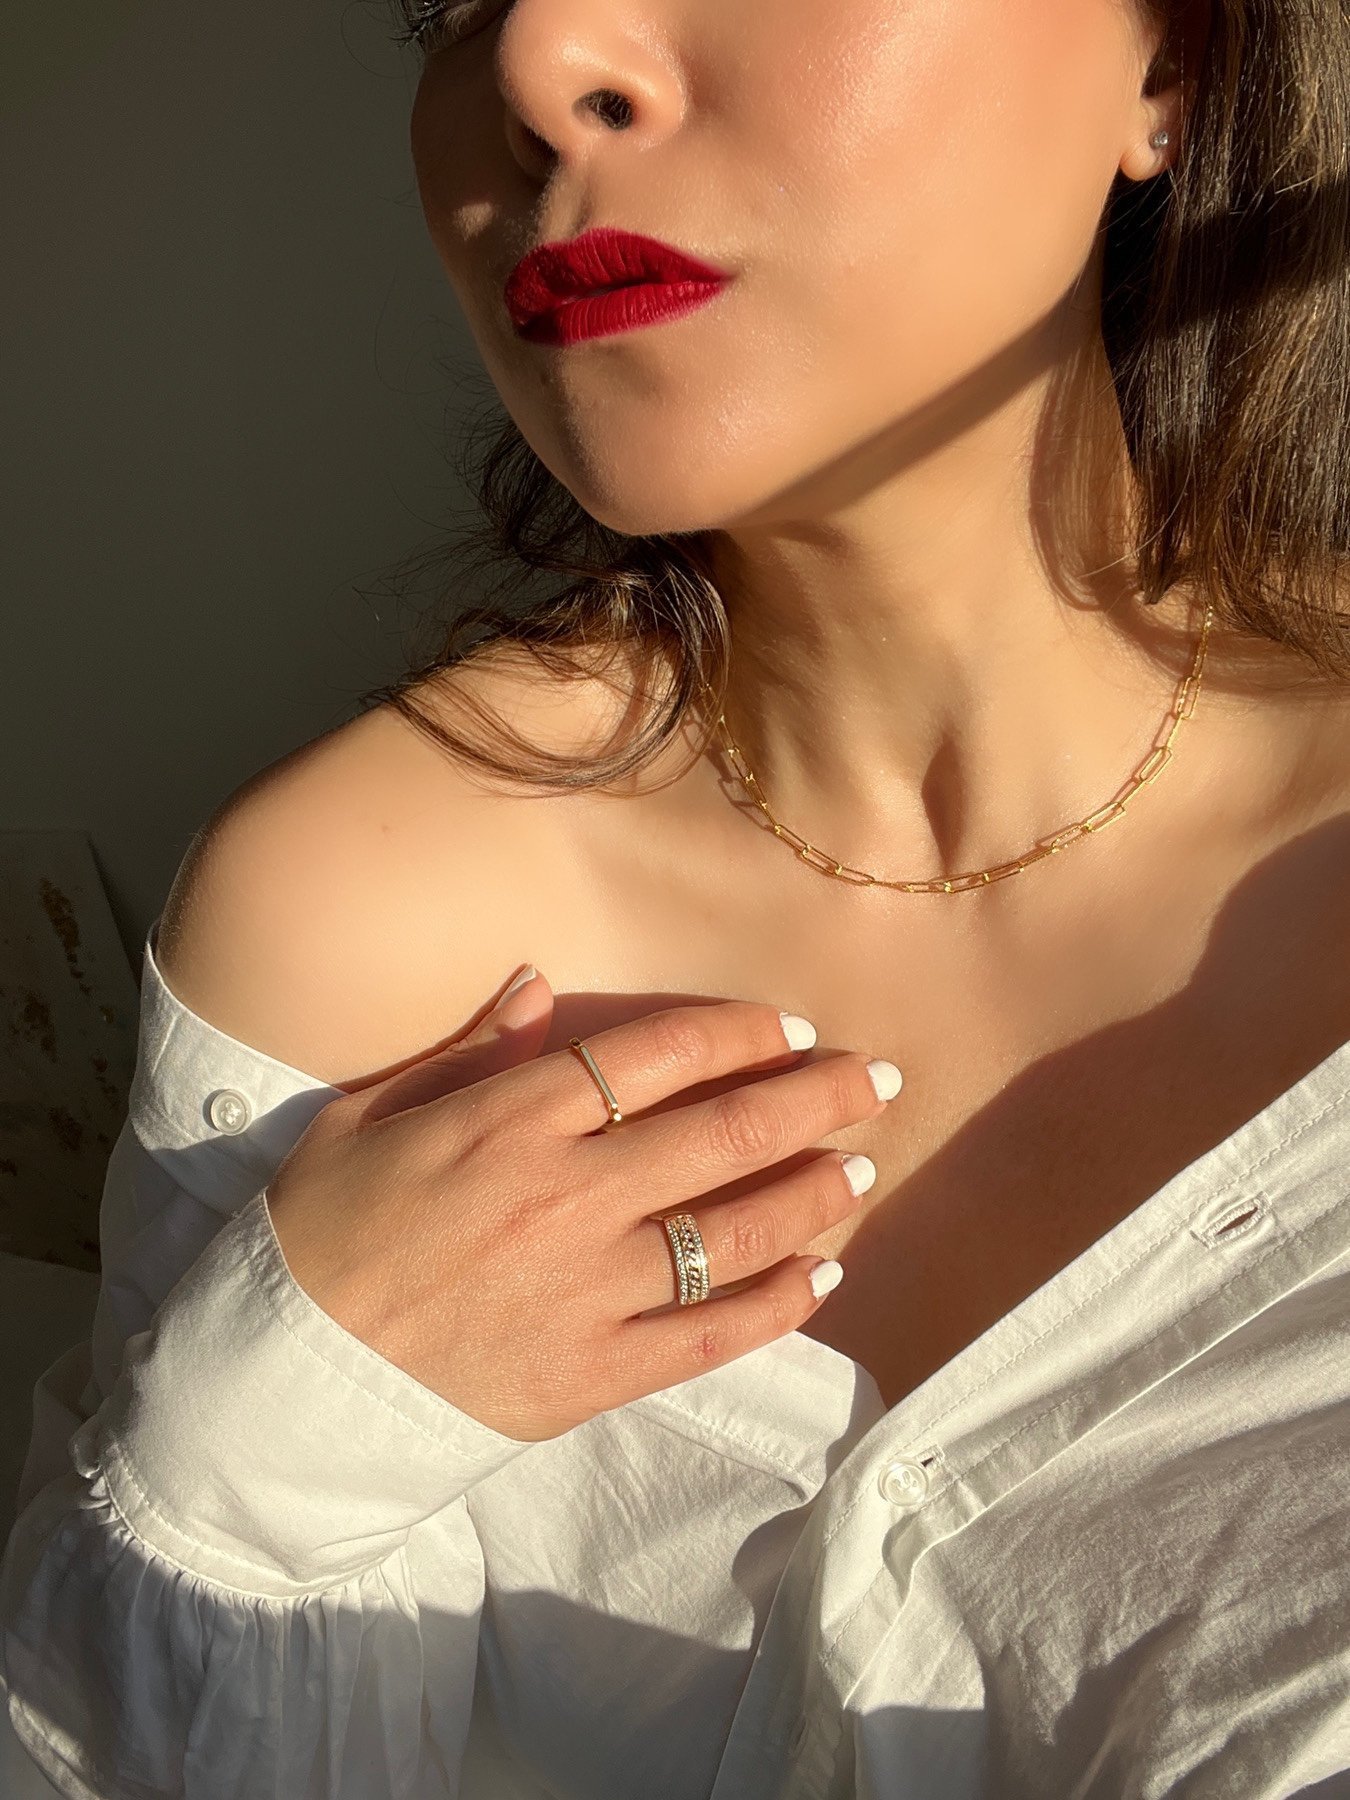 Monica Vinader jewellery on woman with red lips and white shirt